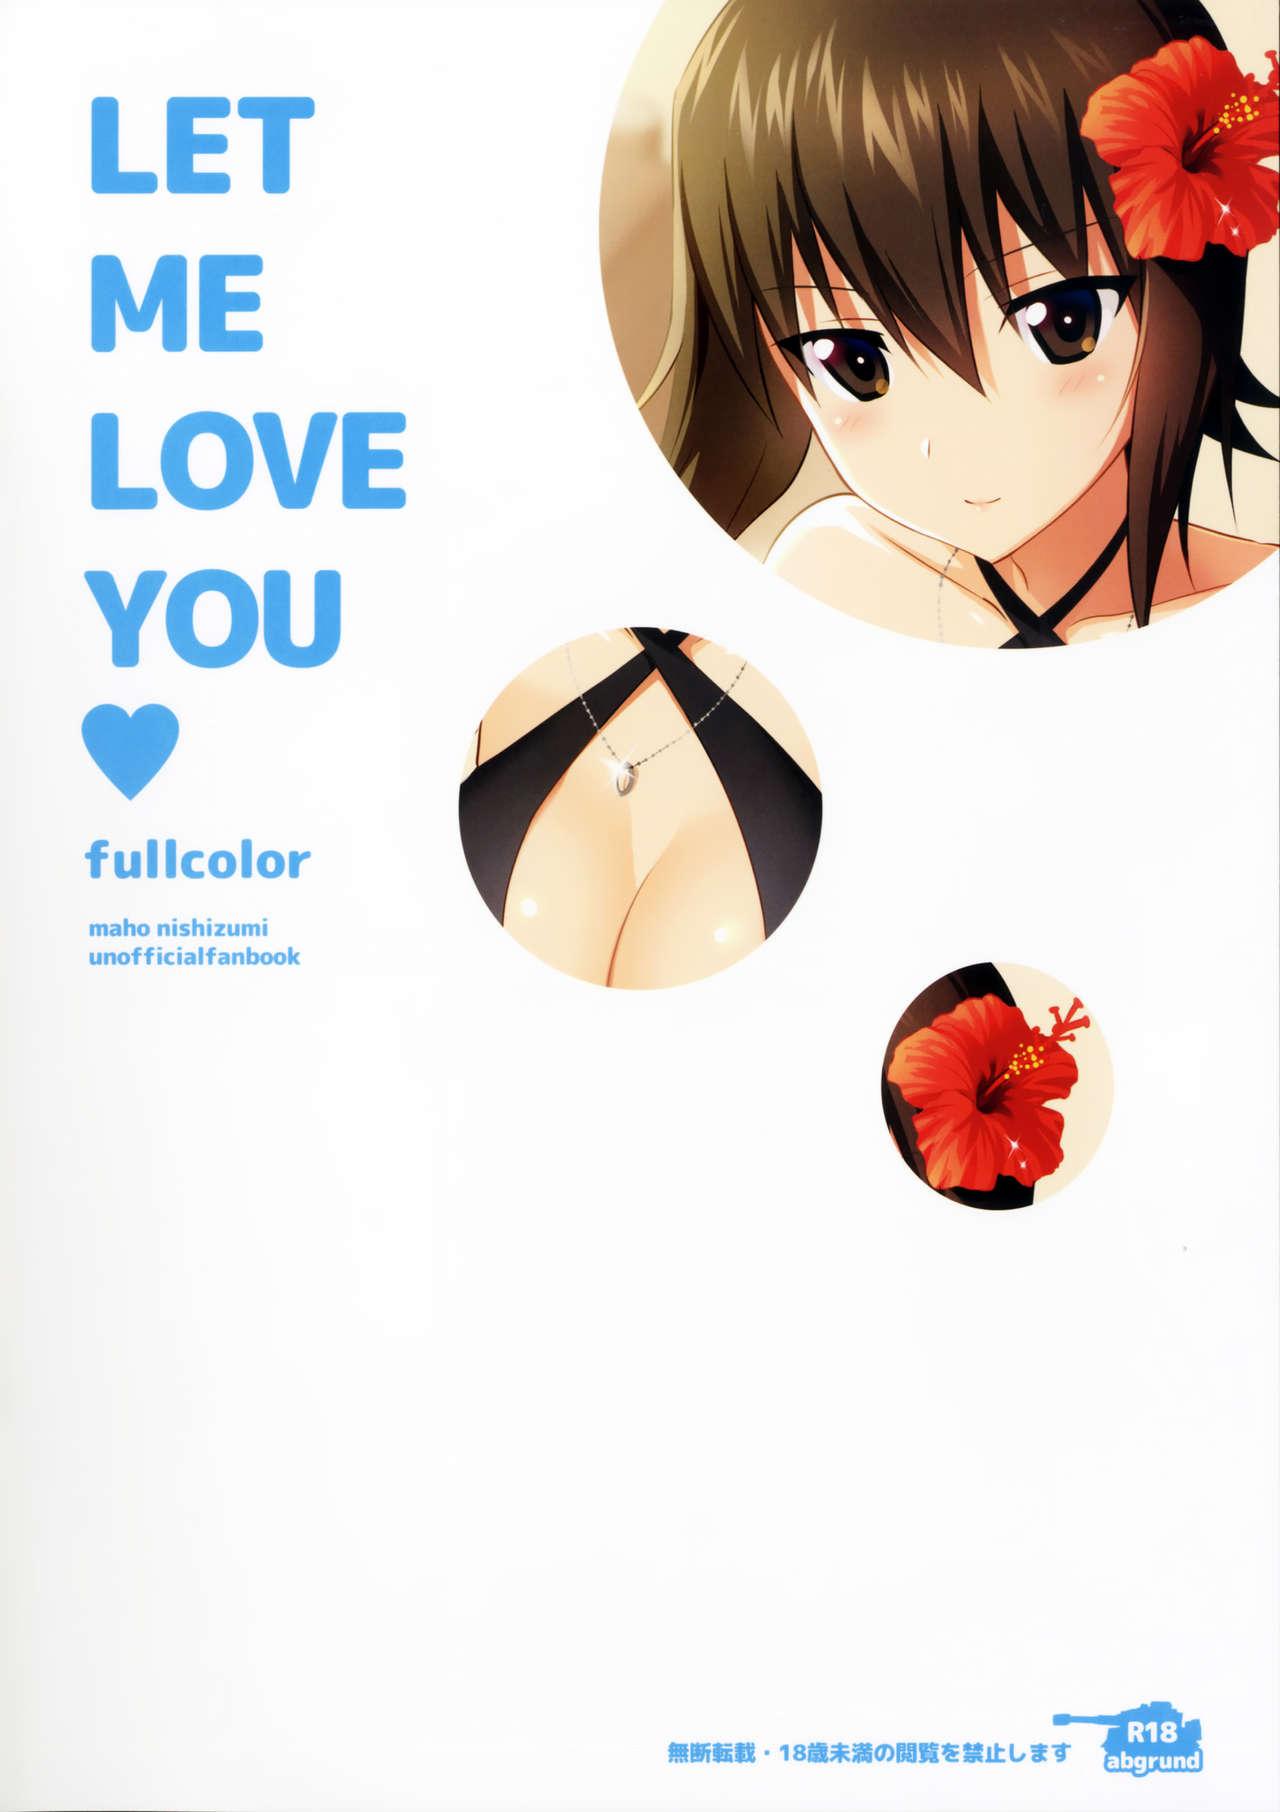 Moaning LET ME LOVE YOU fullcolor - Girls und panzer Gay Pornstar - Page 19